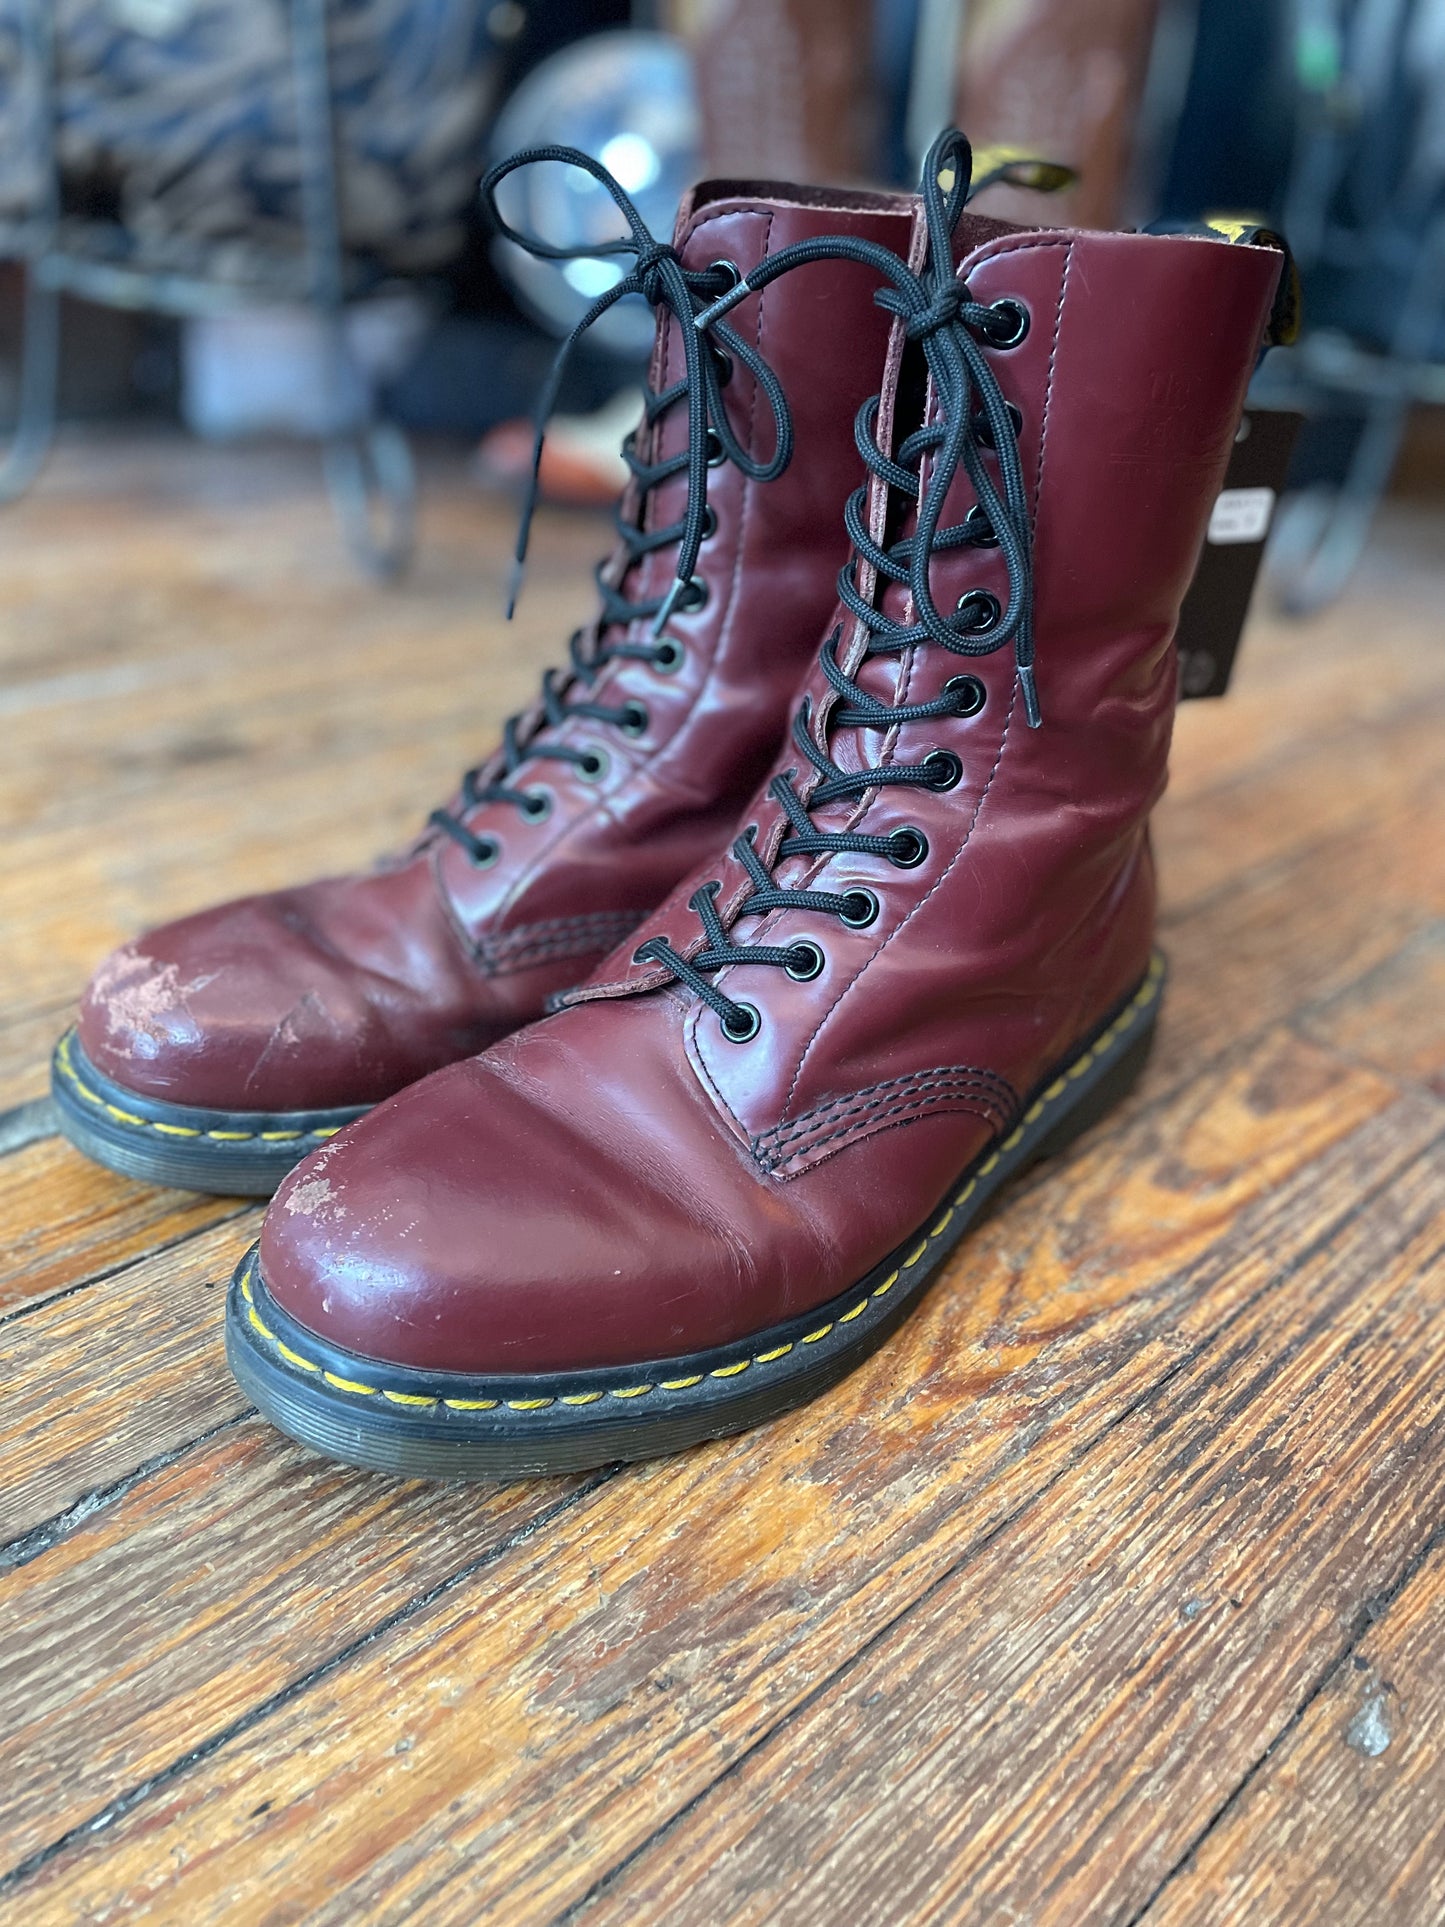 Doc Martens Smooth Cherry Red 1460 10 Eyelet Lace Up Boots